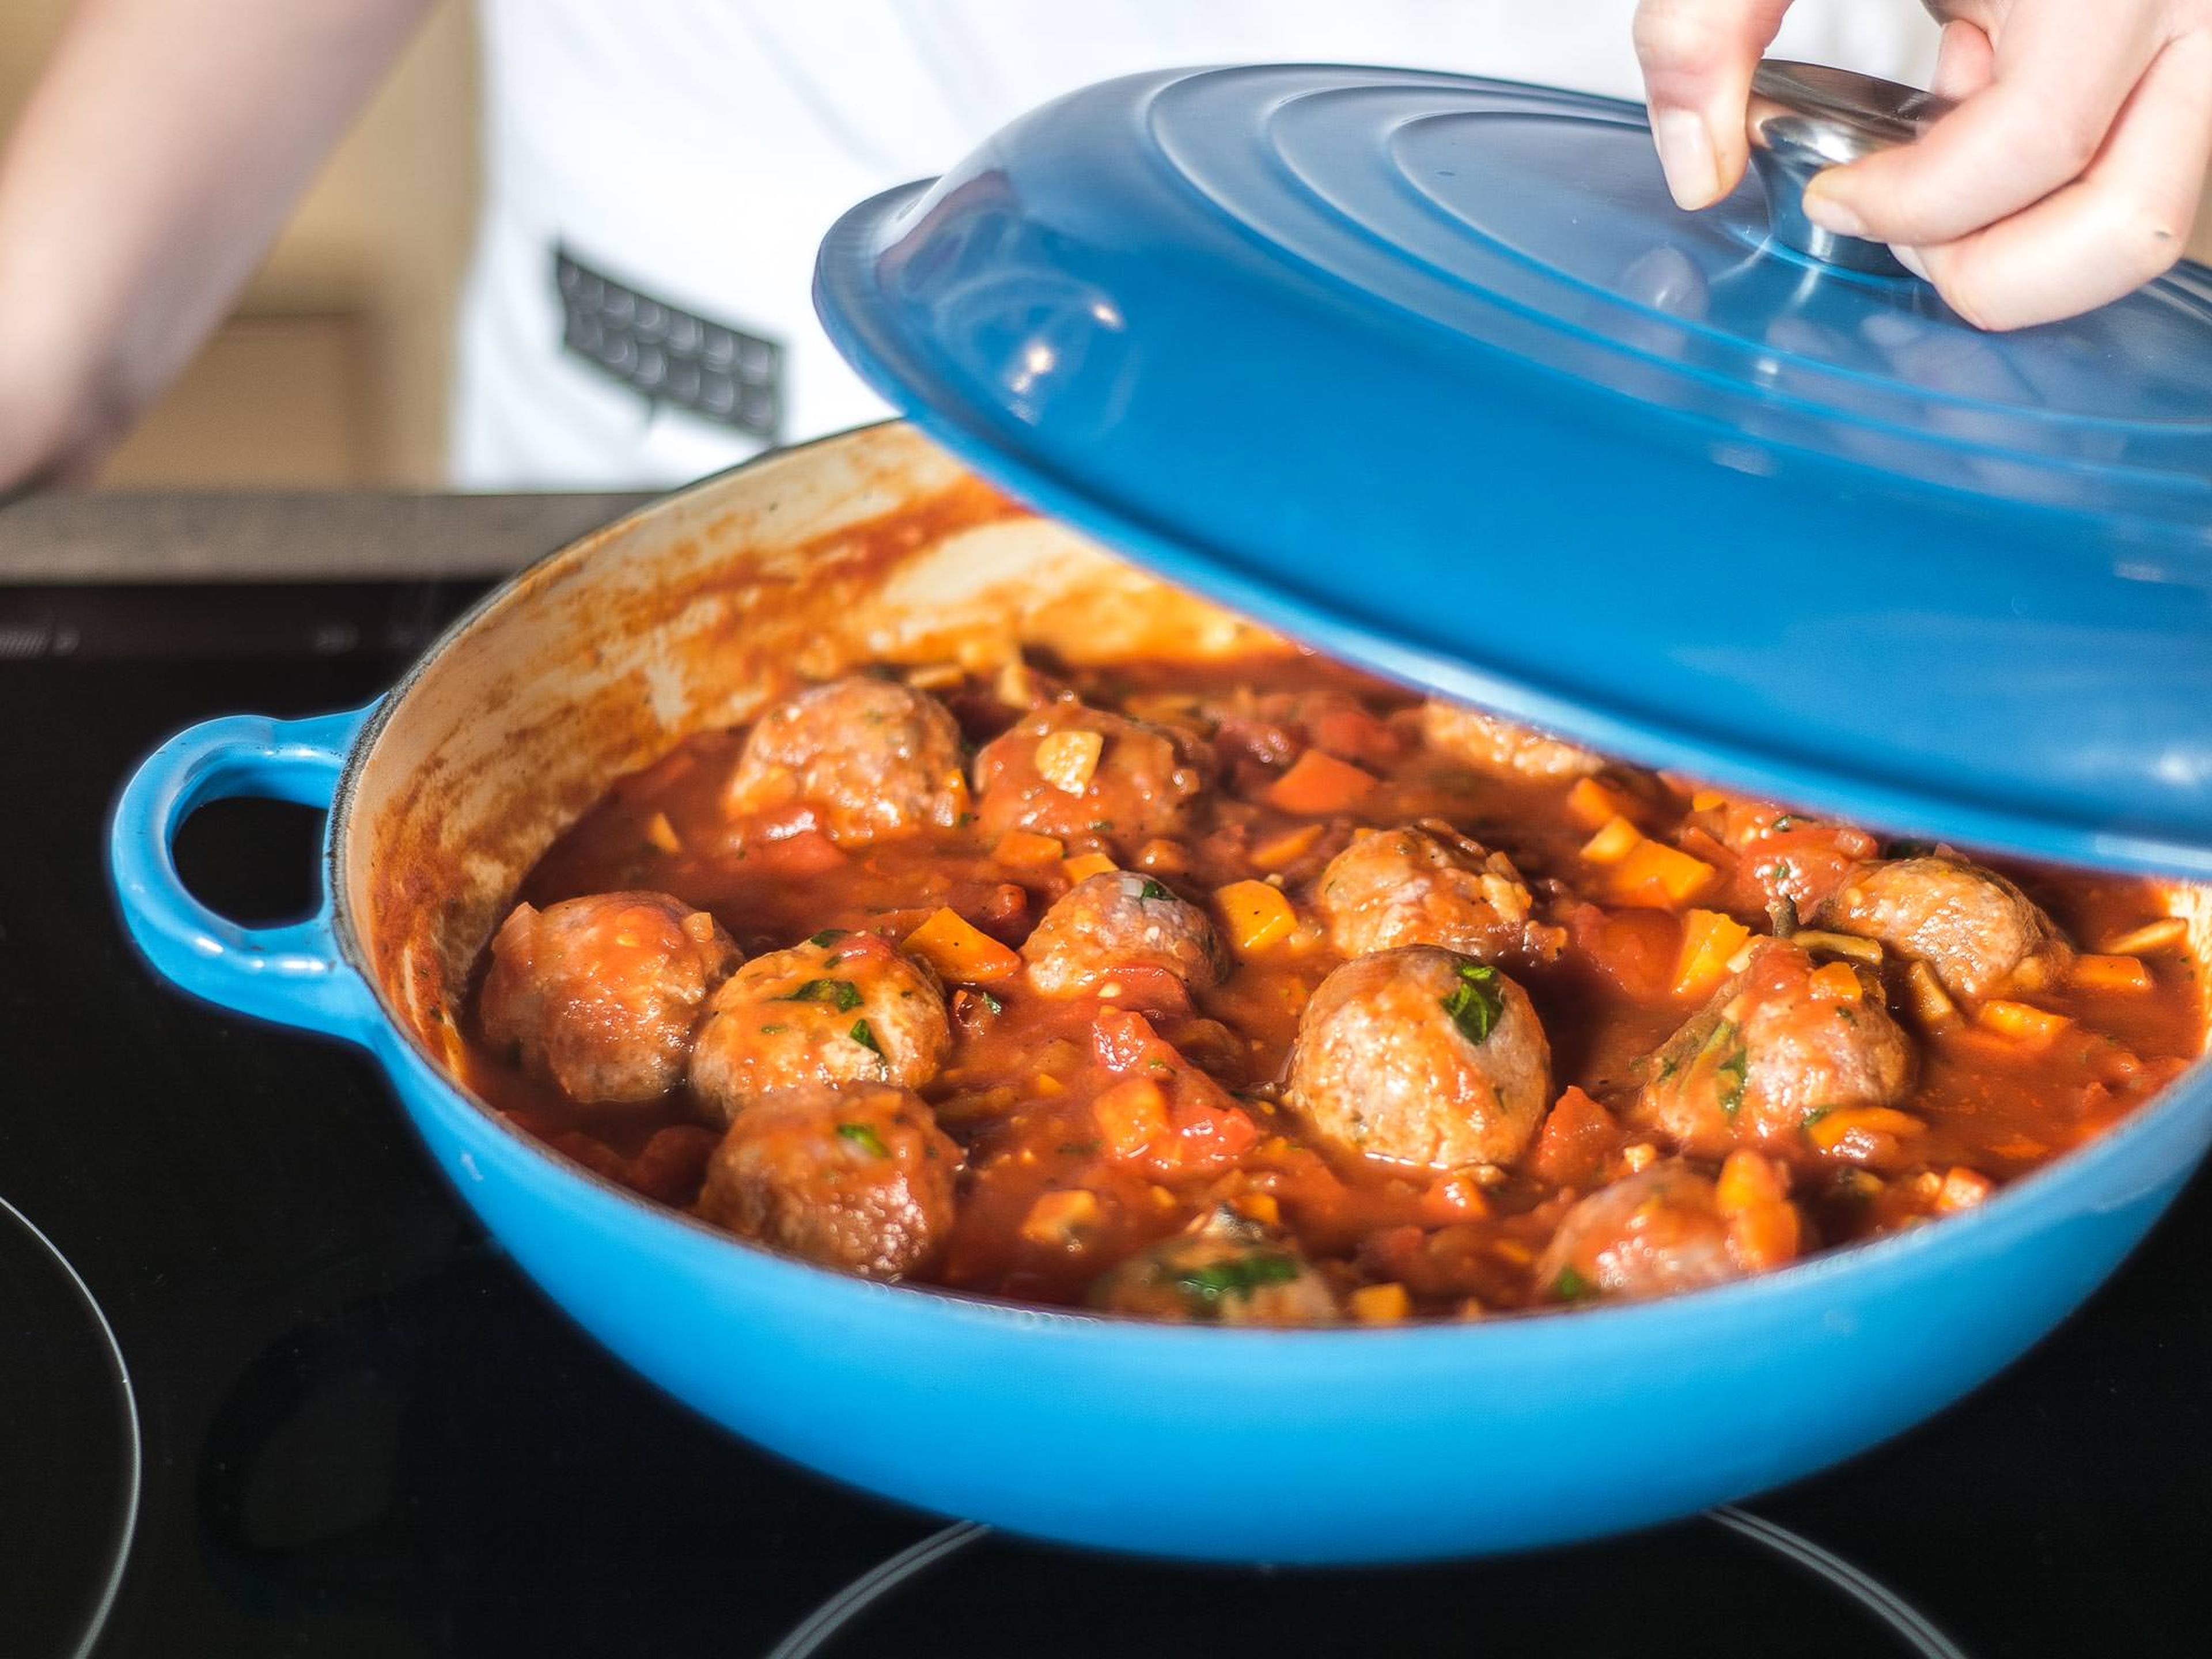 Next, add chopped herbs and meatballs to the tomato sauce and simmer for approx. 10 – 15 minutes with closed lid until the meatballs are cooked. Serve with rice or toasted bread.